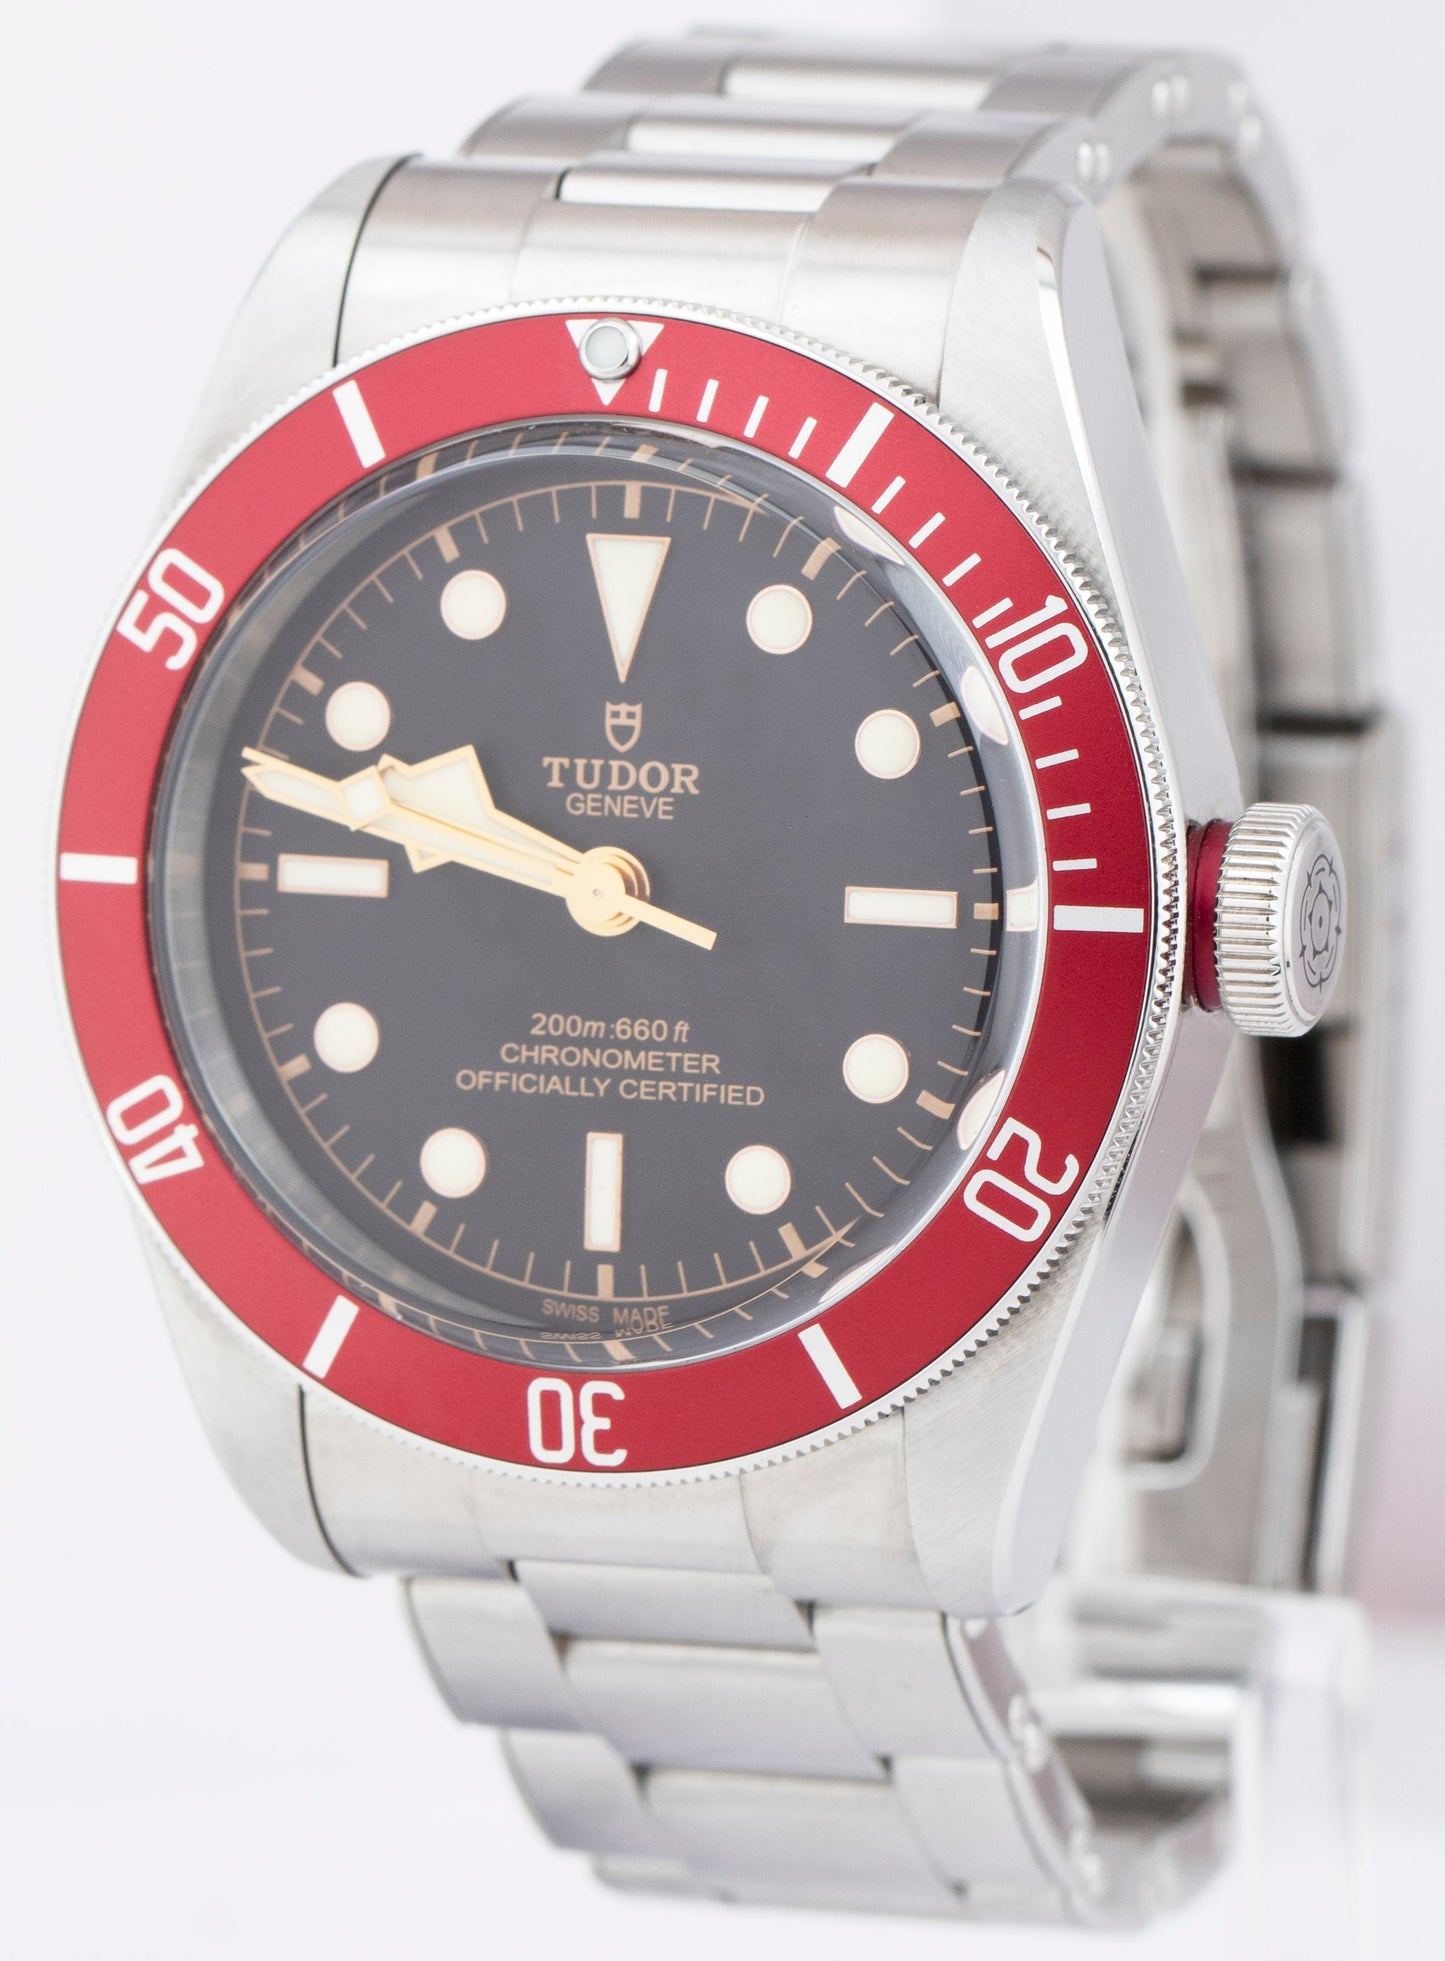 2021 Tudor Black Bay Heritage 79230 R Stainless Steel Red 41mm Automatic Watch